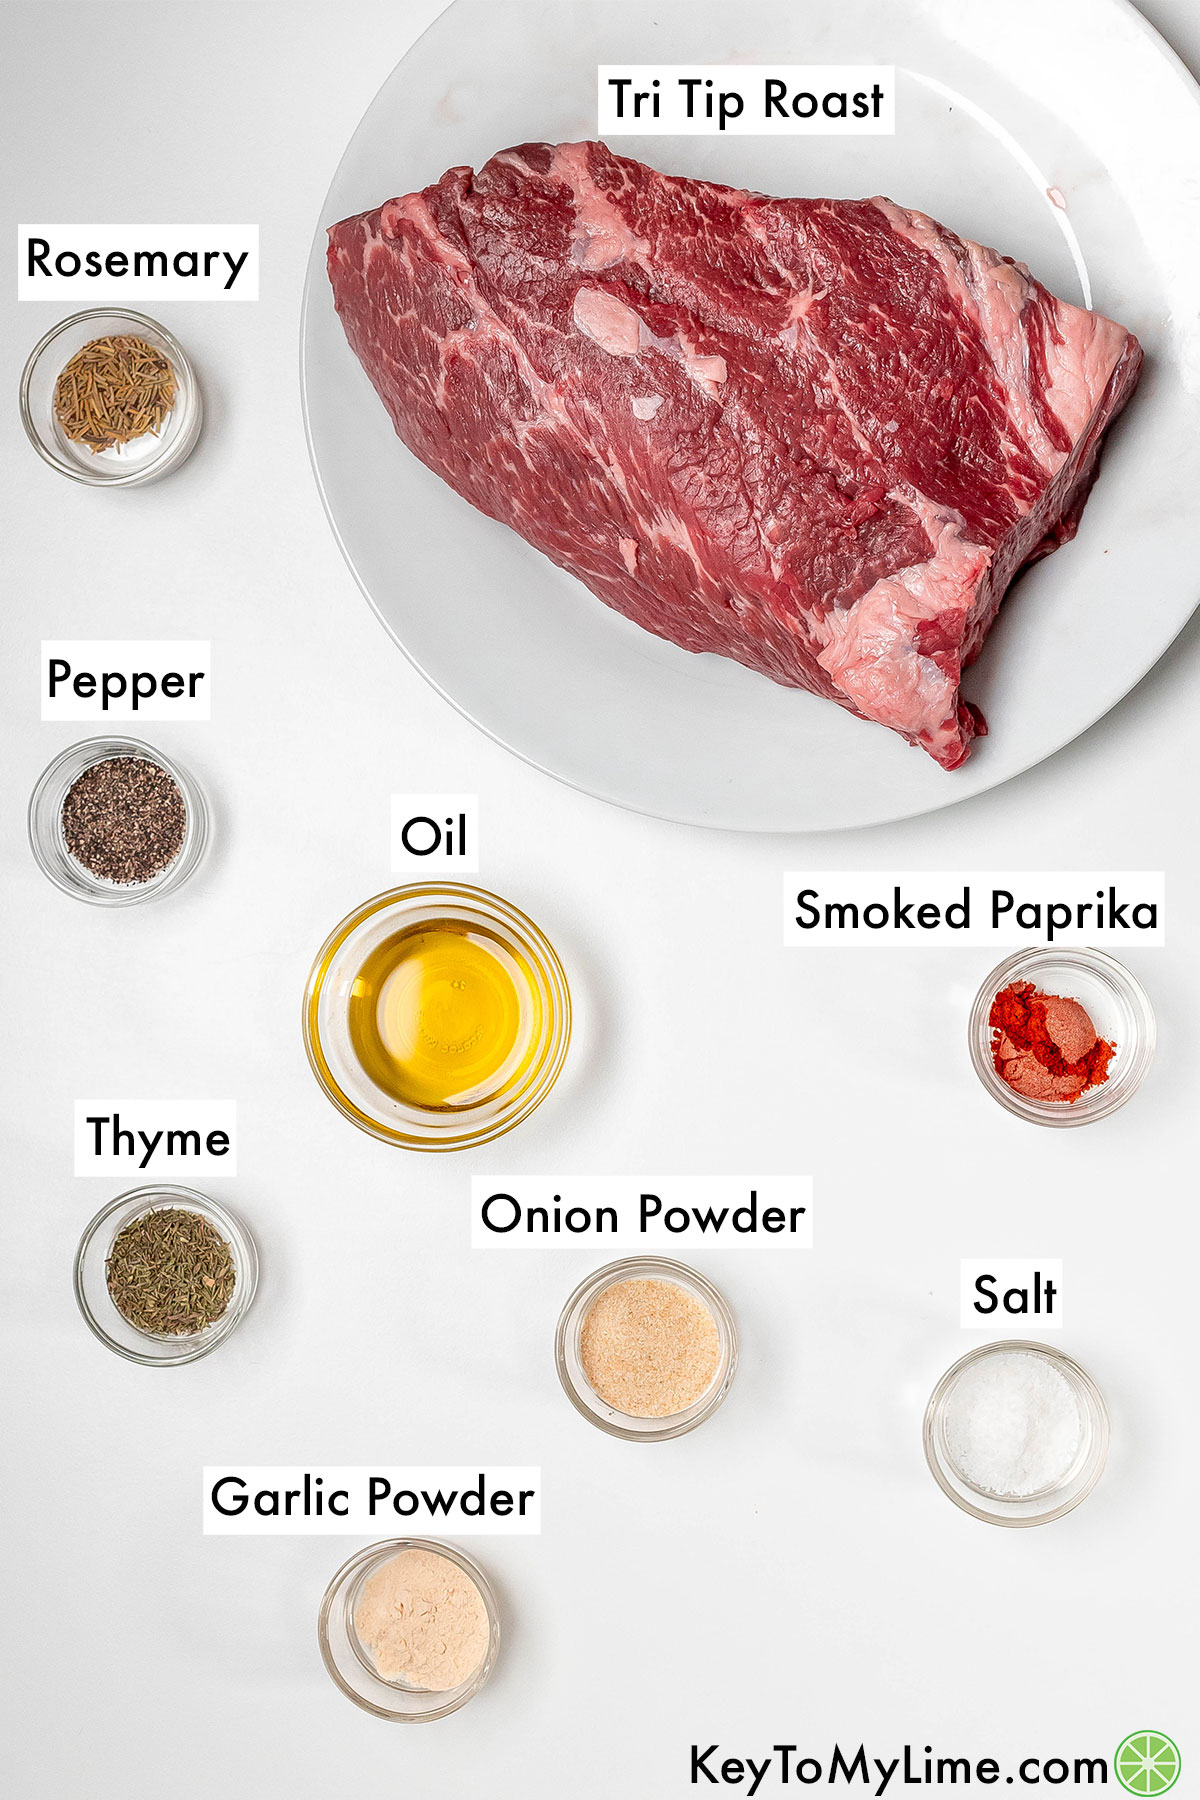 The labeled ingredients for tri tip roast.